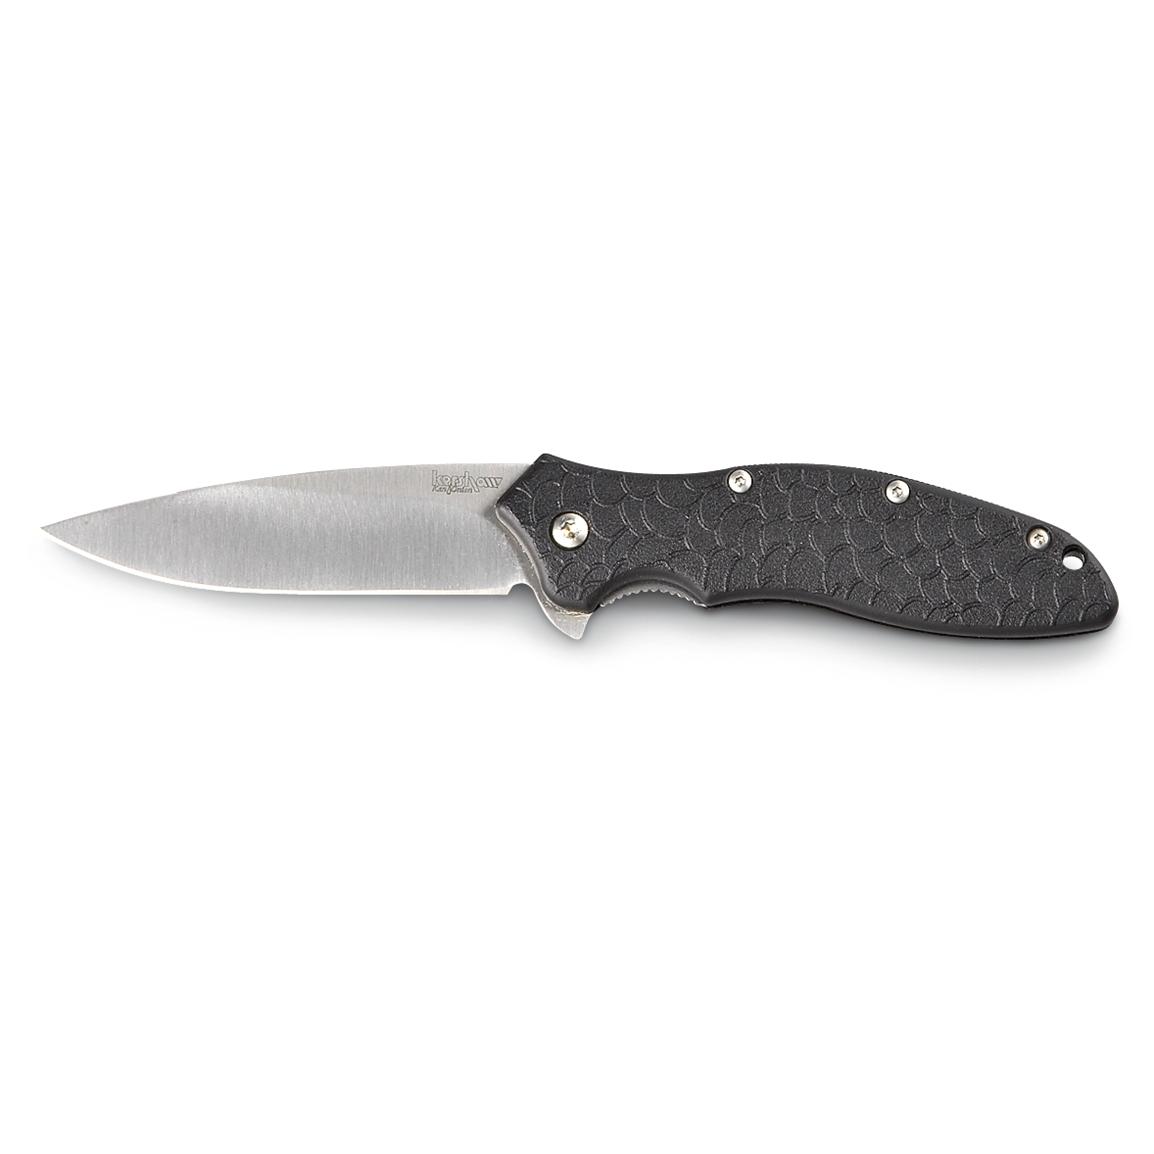 Kershaw OSO Sweet 1830 Spring-Assisted Knife